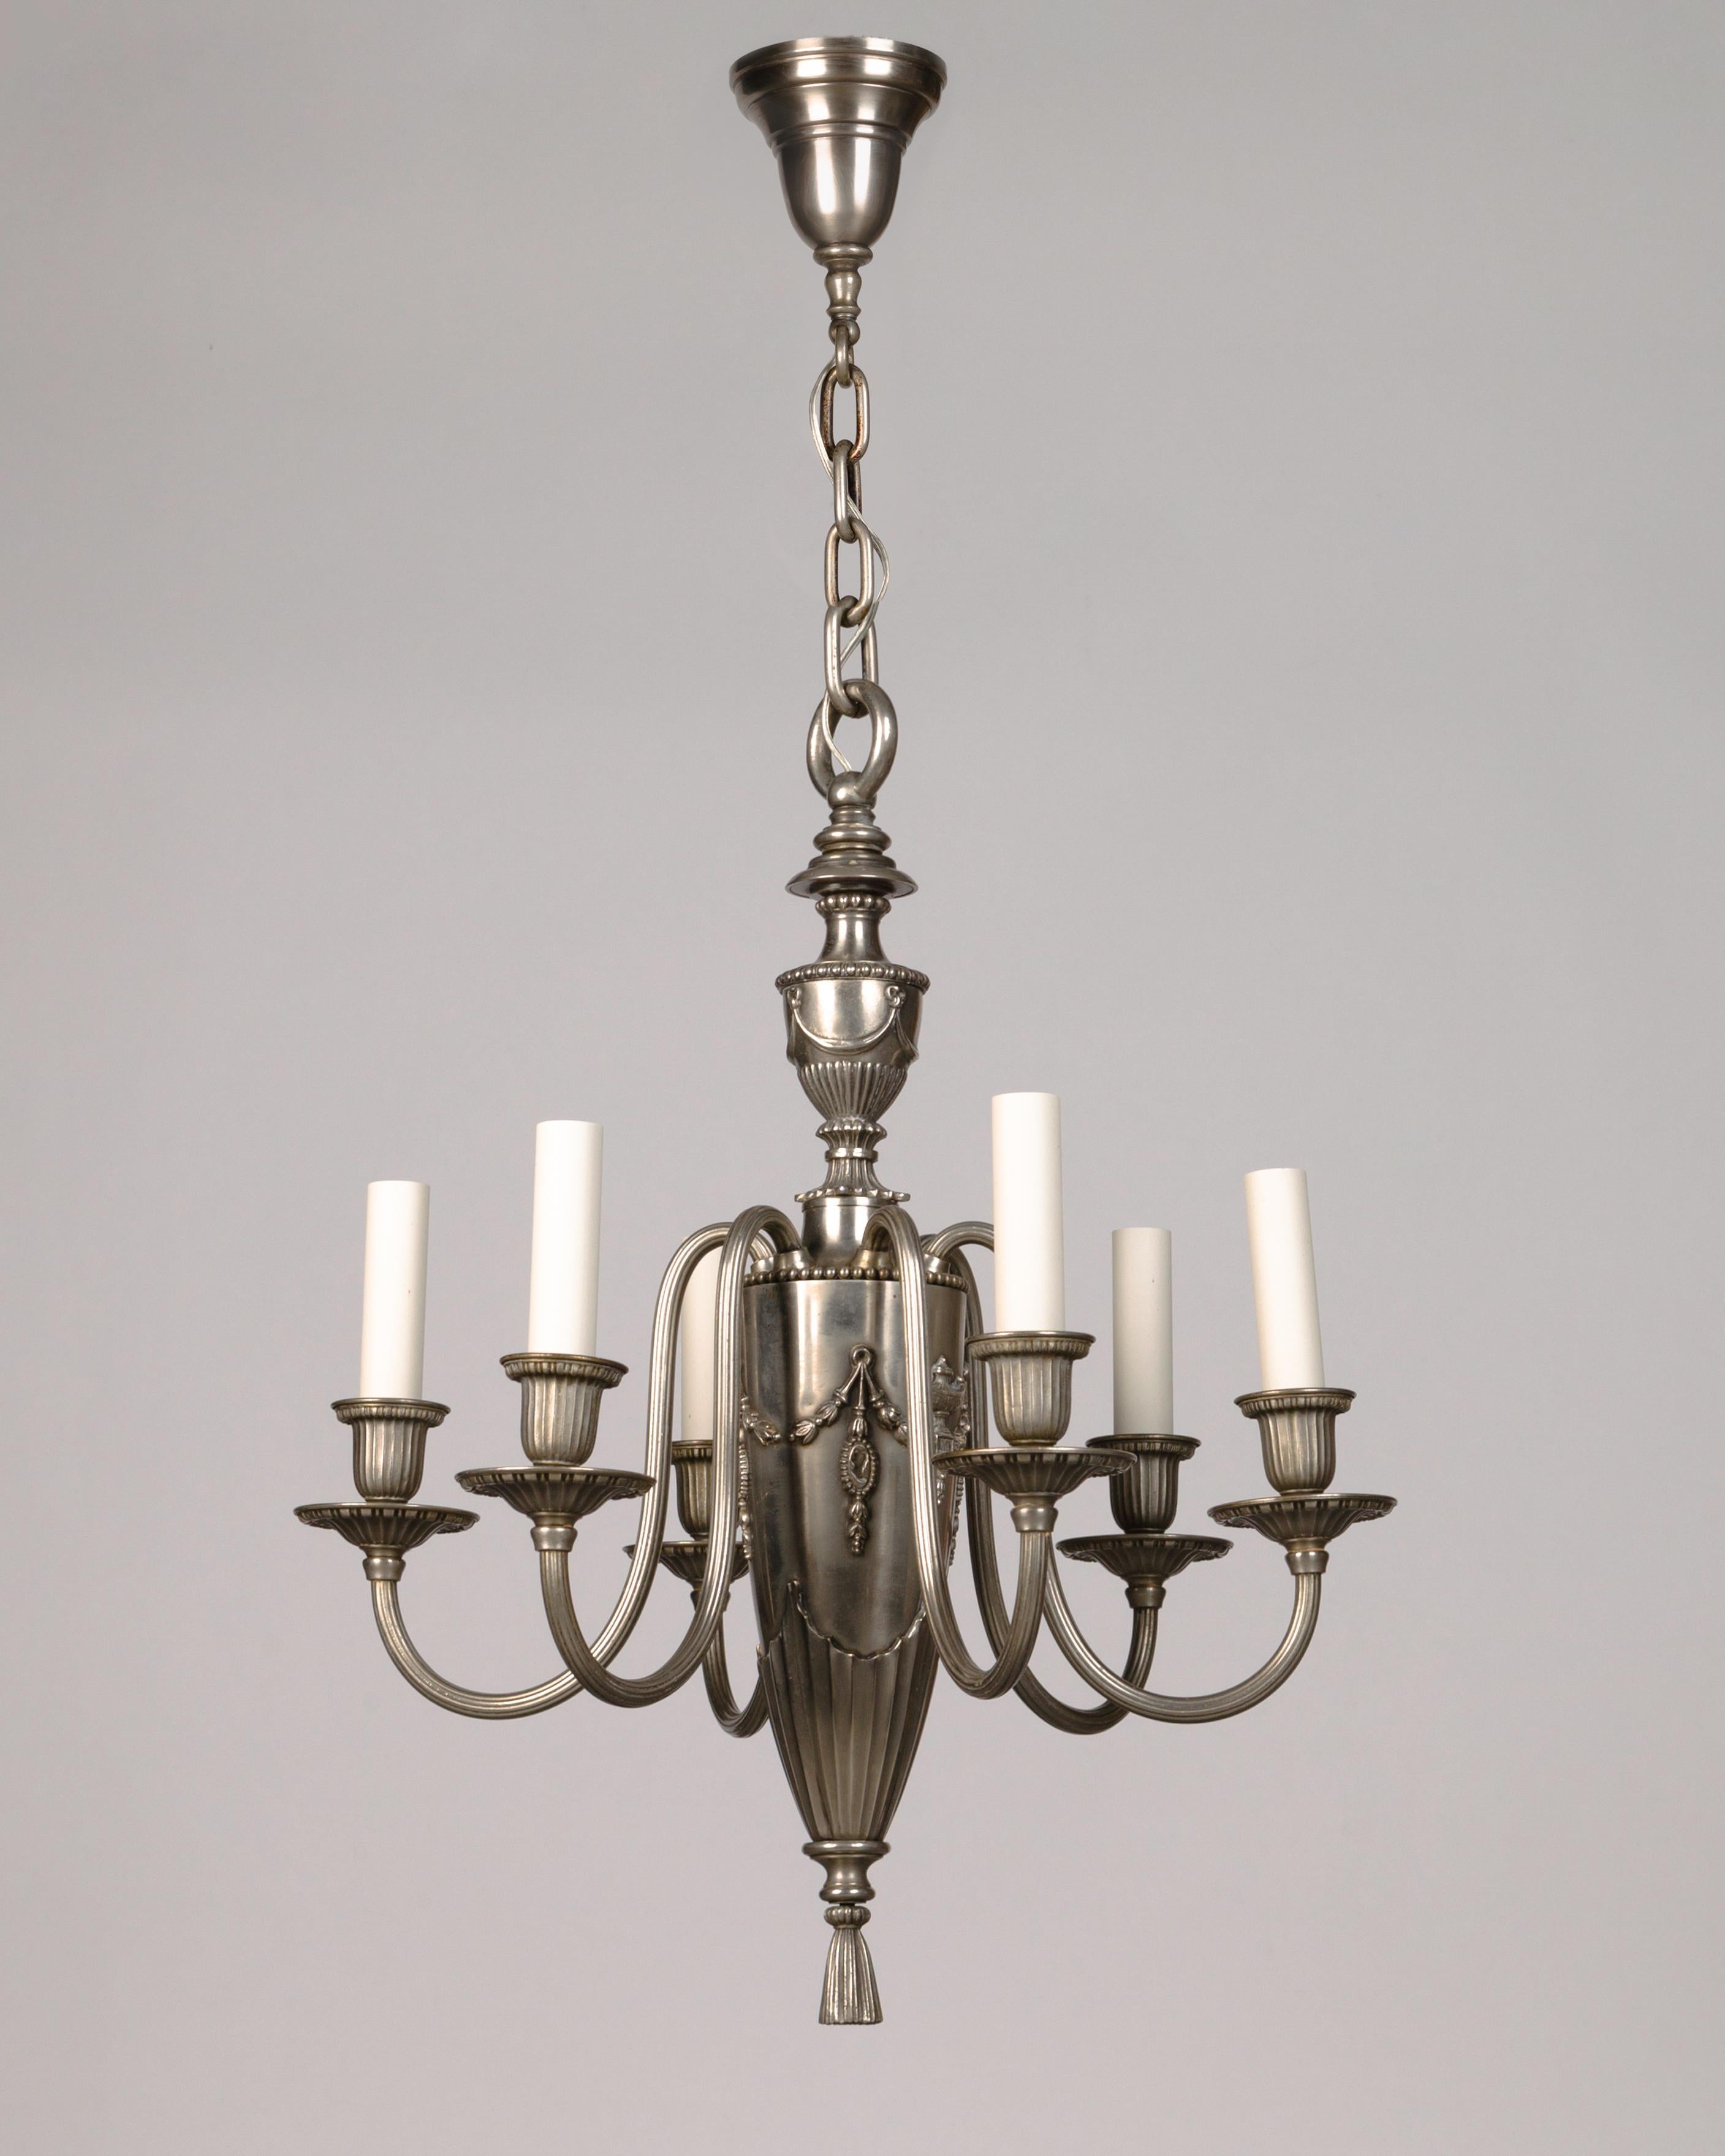 Cast Six Arm Adam Style Chandelier in Antique Nickel by Bradley and Hubbard, c. 1920s For Sale